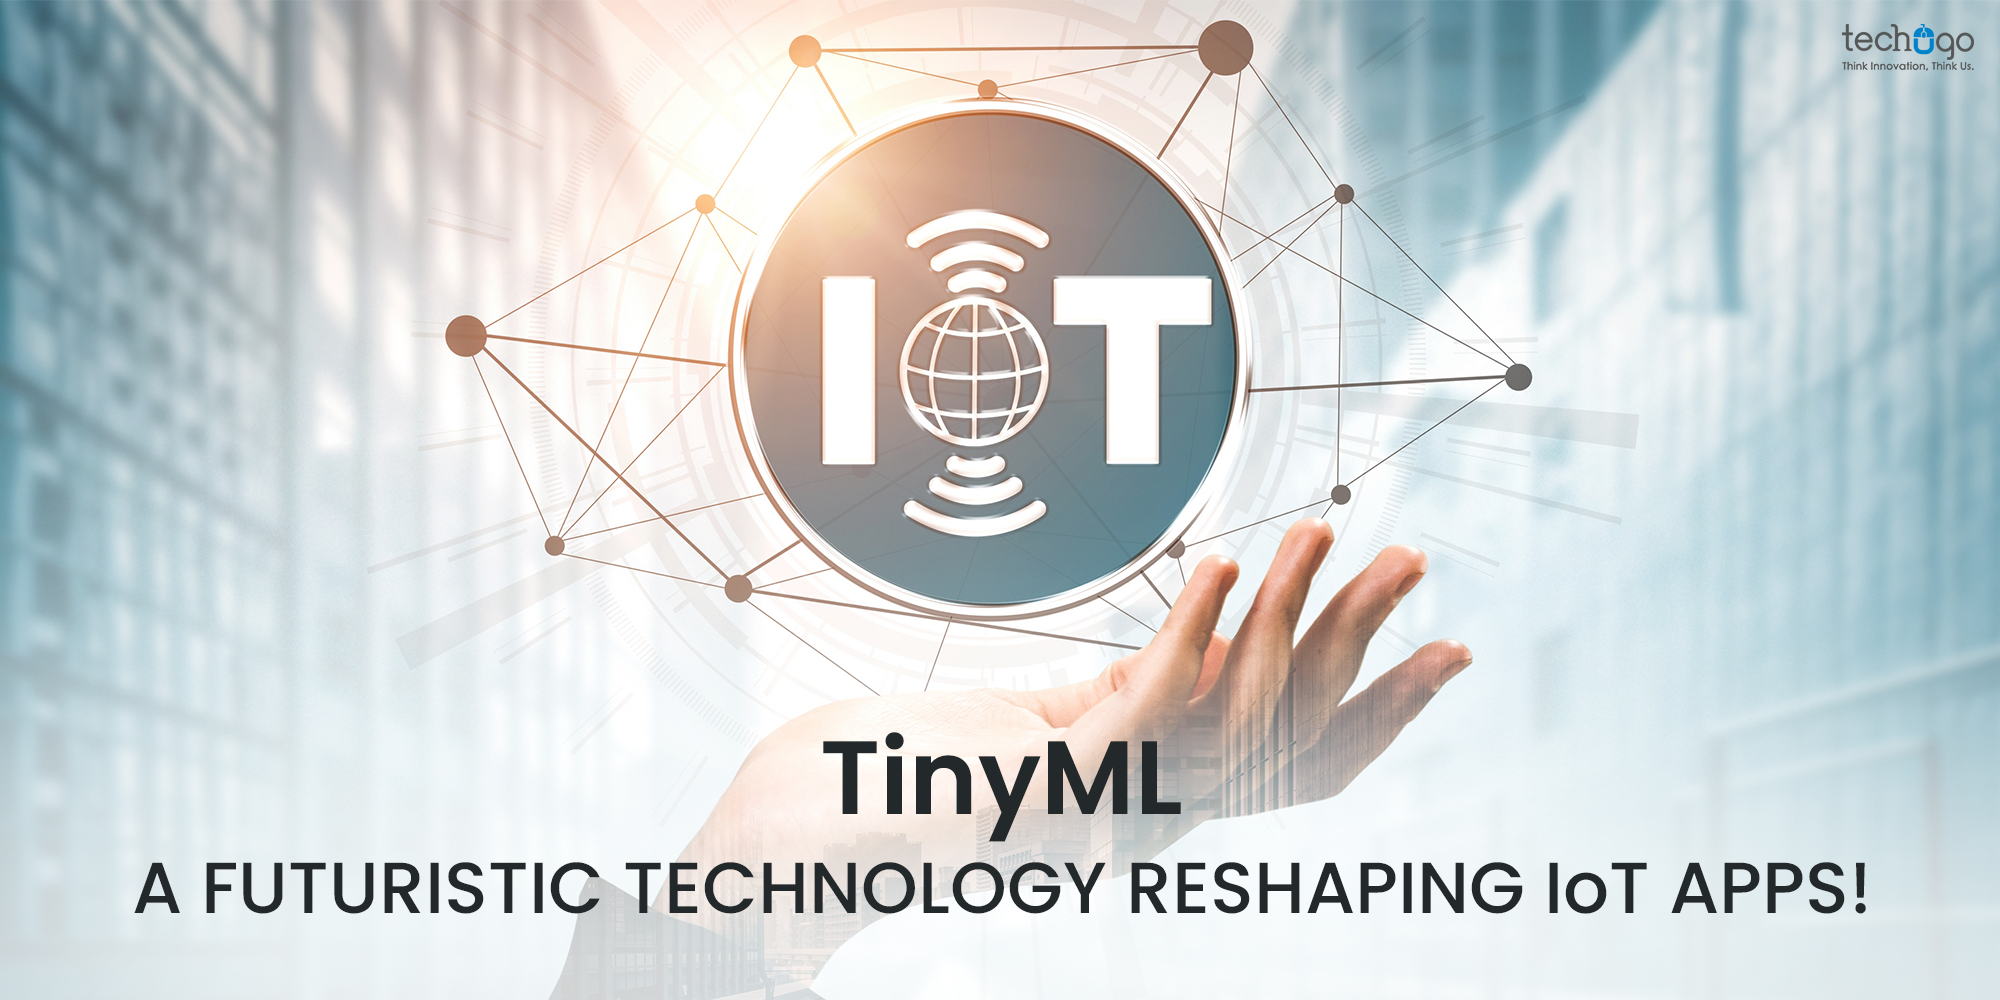 Tinyml; A Futuristic Technology Reshaping Iot Apps!